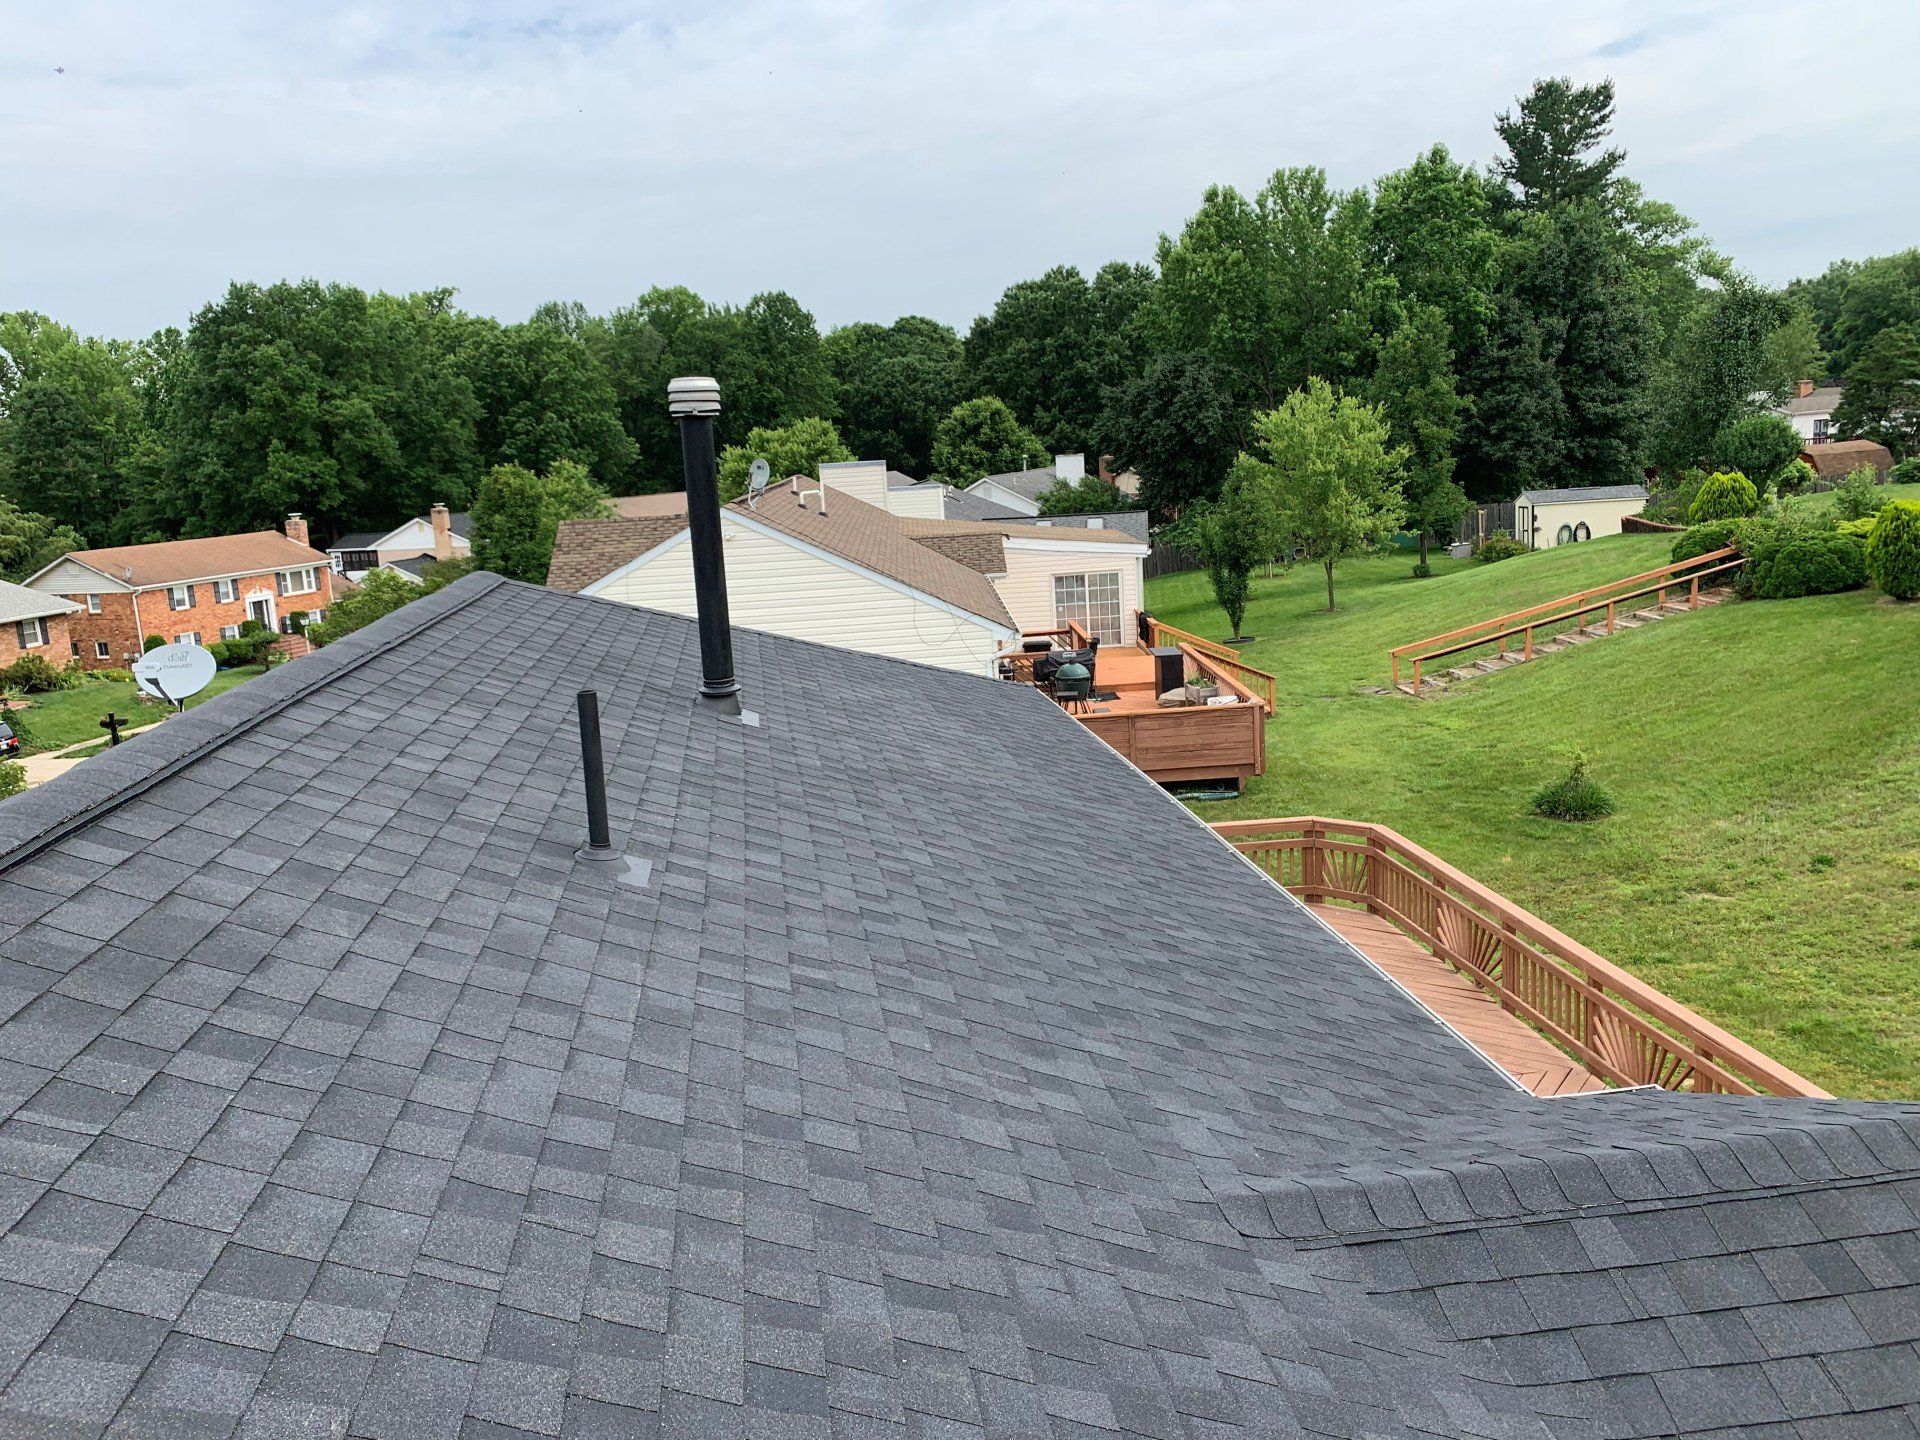 New Roofs — Roofers Installing New Roof in Southern Maryland, MD